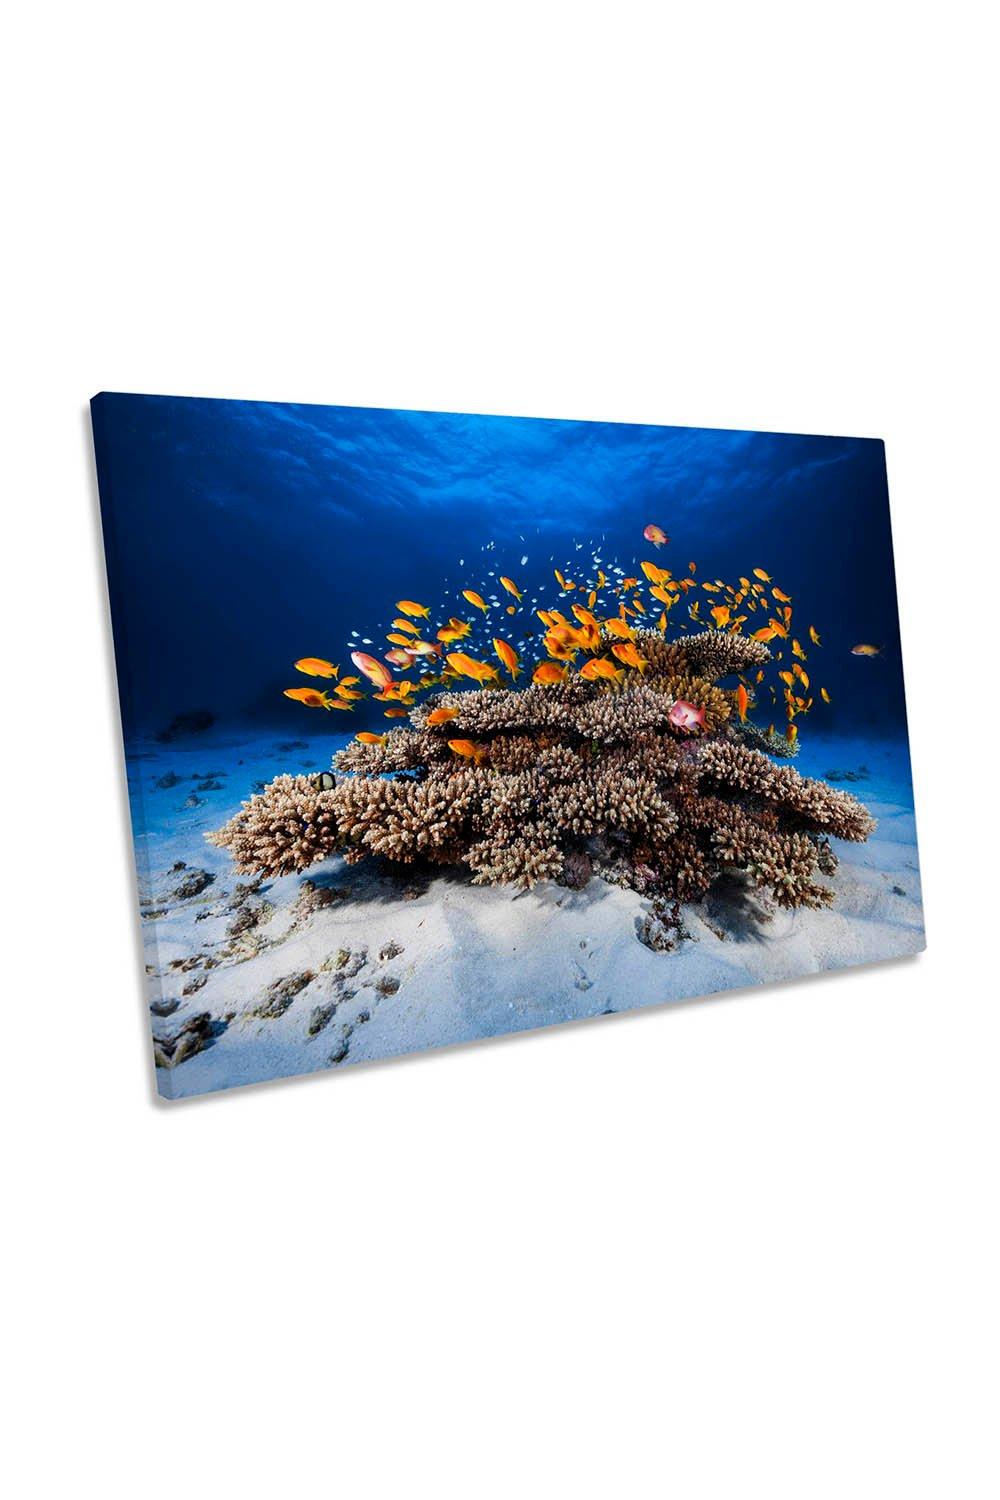 Marine Life Fish Coral Tropical Canvas Wall Art Picture Print